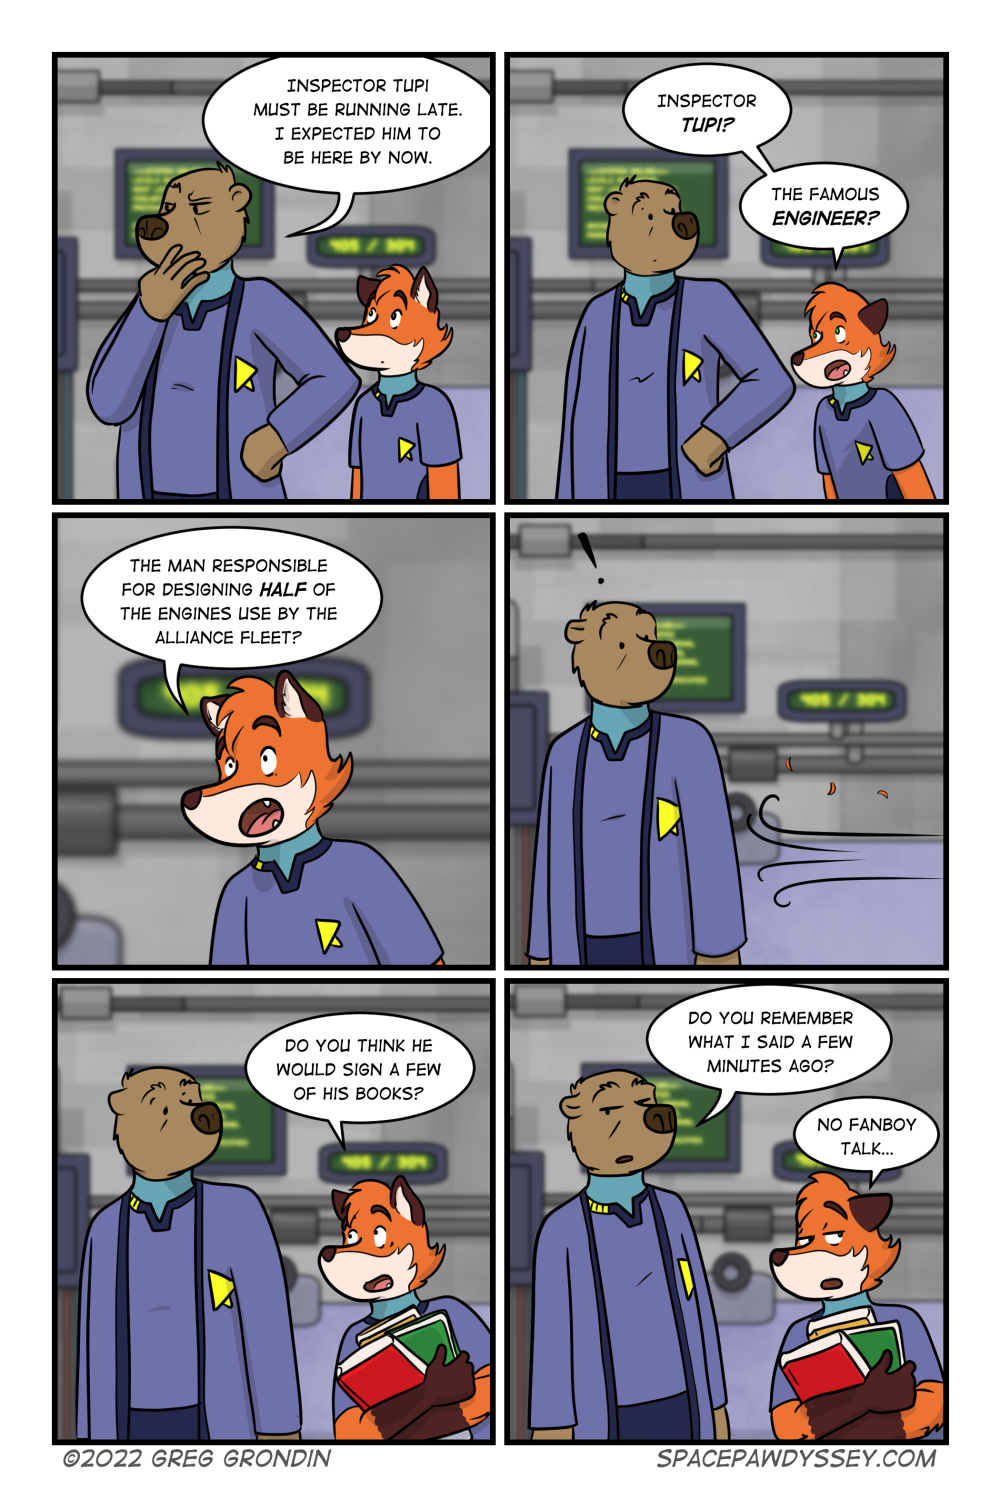 Space Pawdyssey #536